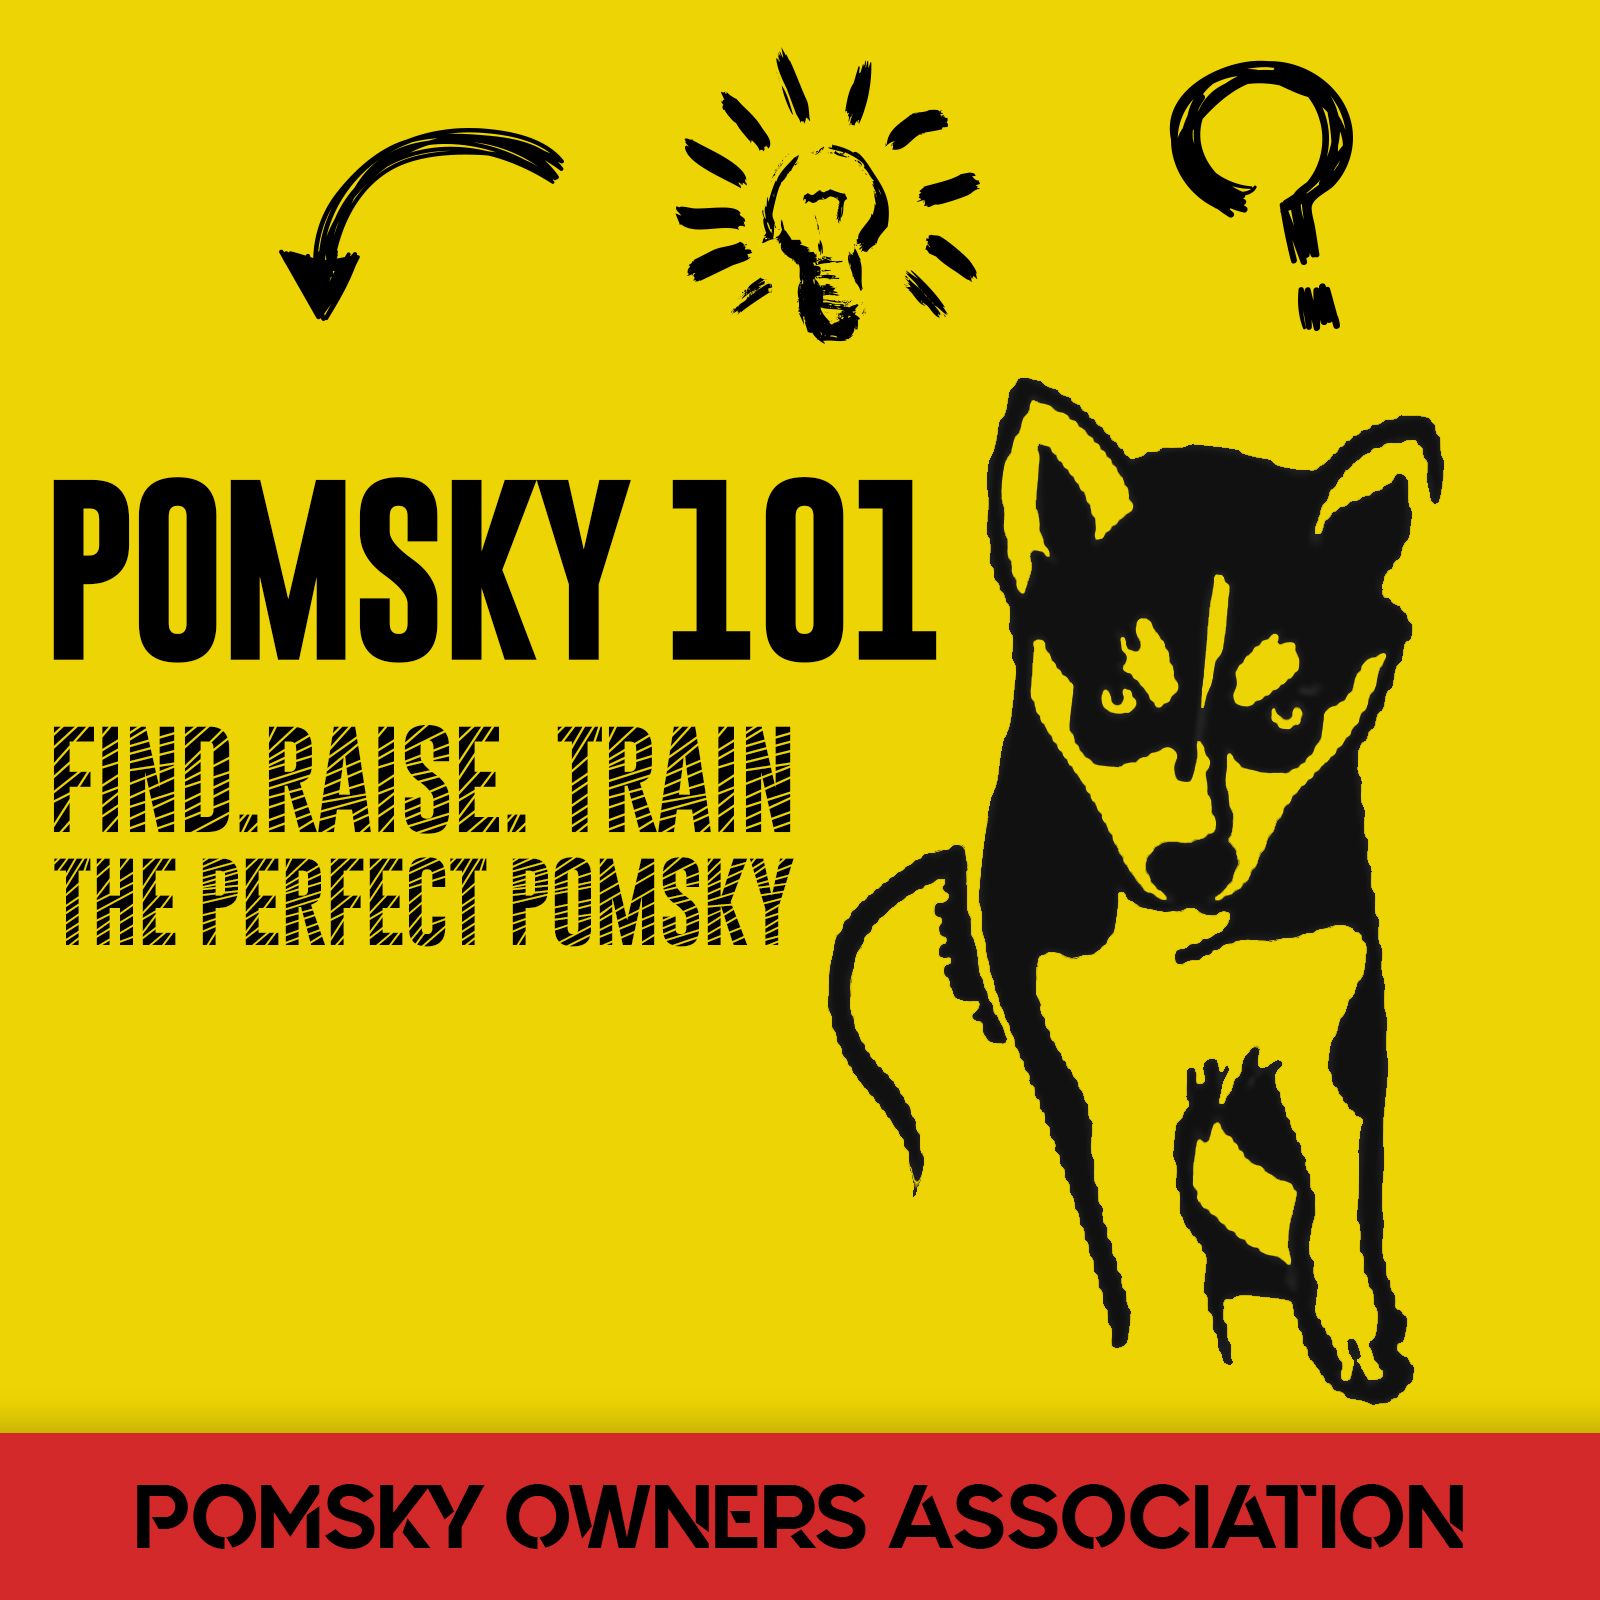 017 – Pomsky Personality – Silly, Energetic, Smart, Fun, and More!